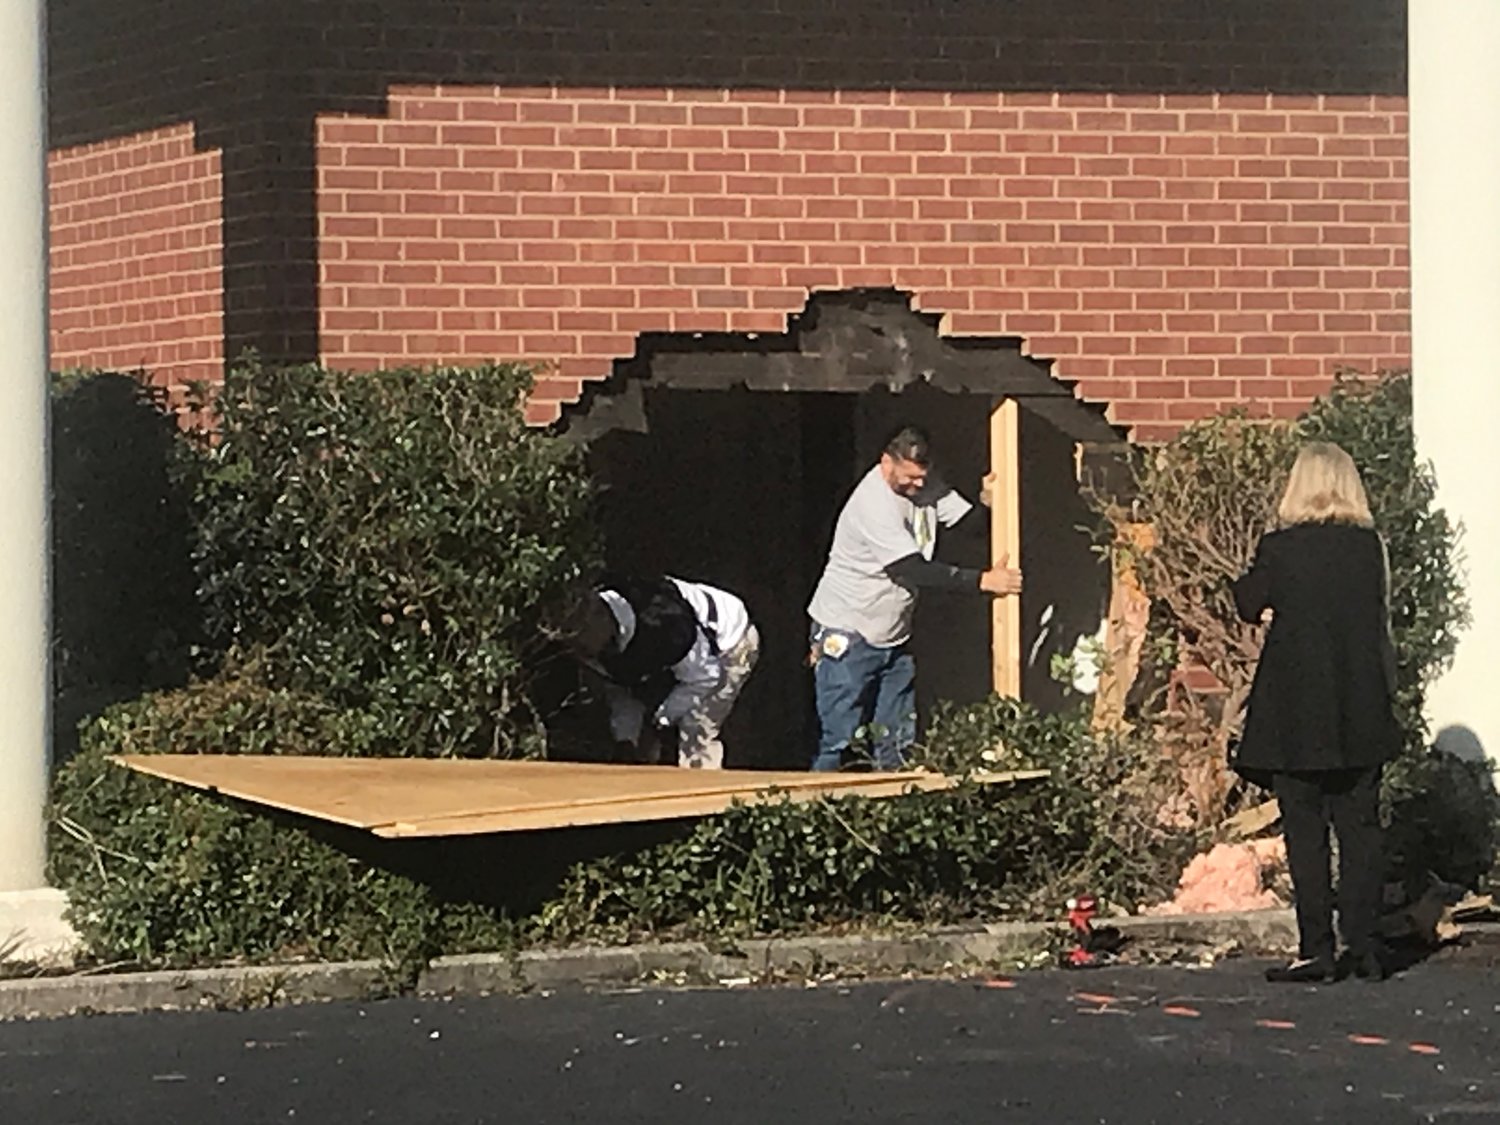 Crews begin work on Wednesday, Nov. 13 to repair damages to the Peachtree Professional Center.